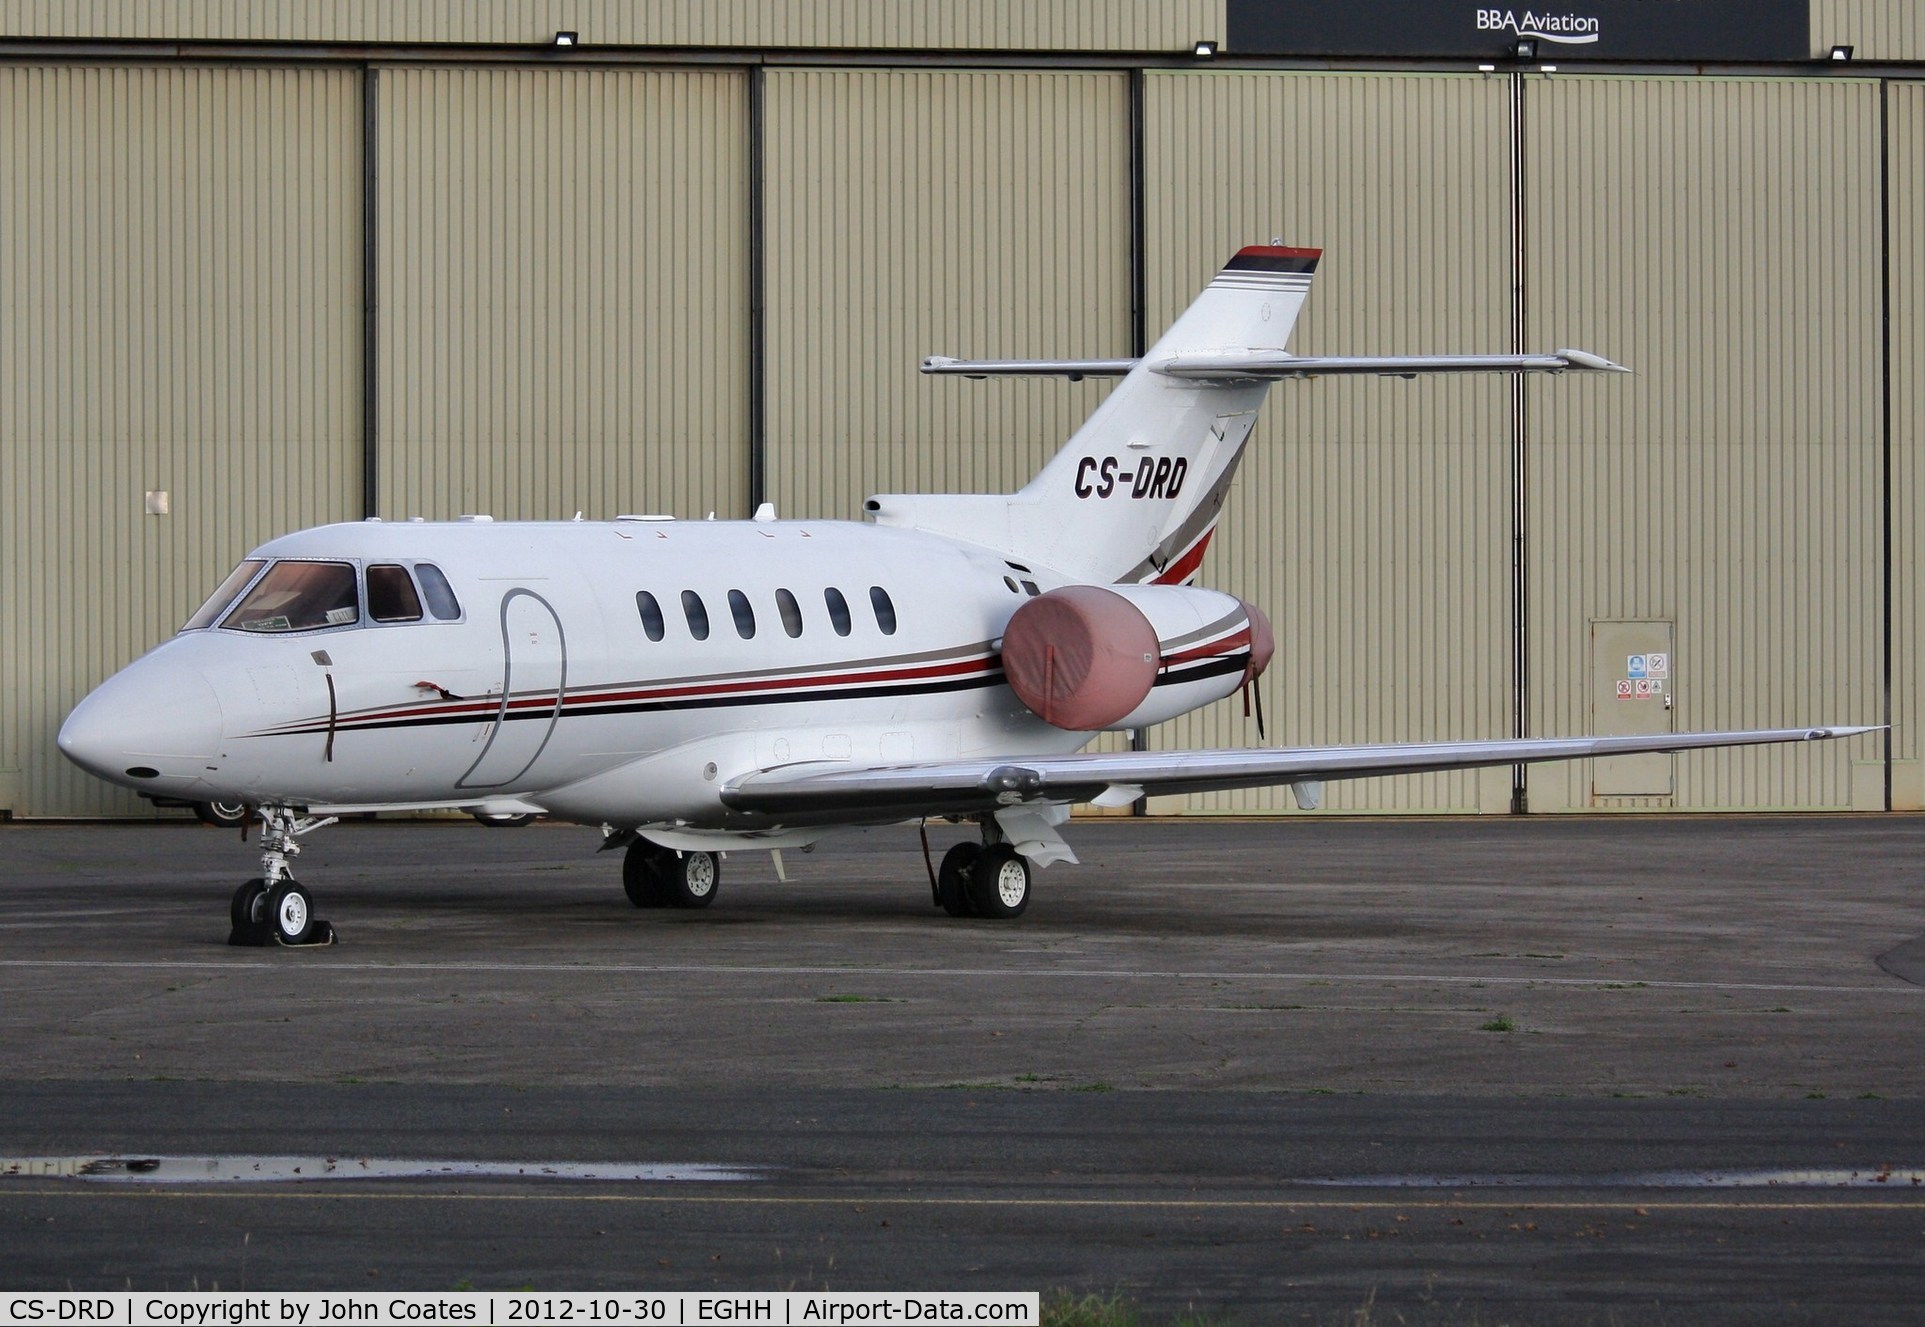 CS-DRD, 2005 Raytheon Hawker 800XP C/N 258721, Parked at Citation Centre after attention at JETS